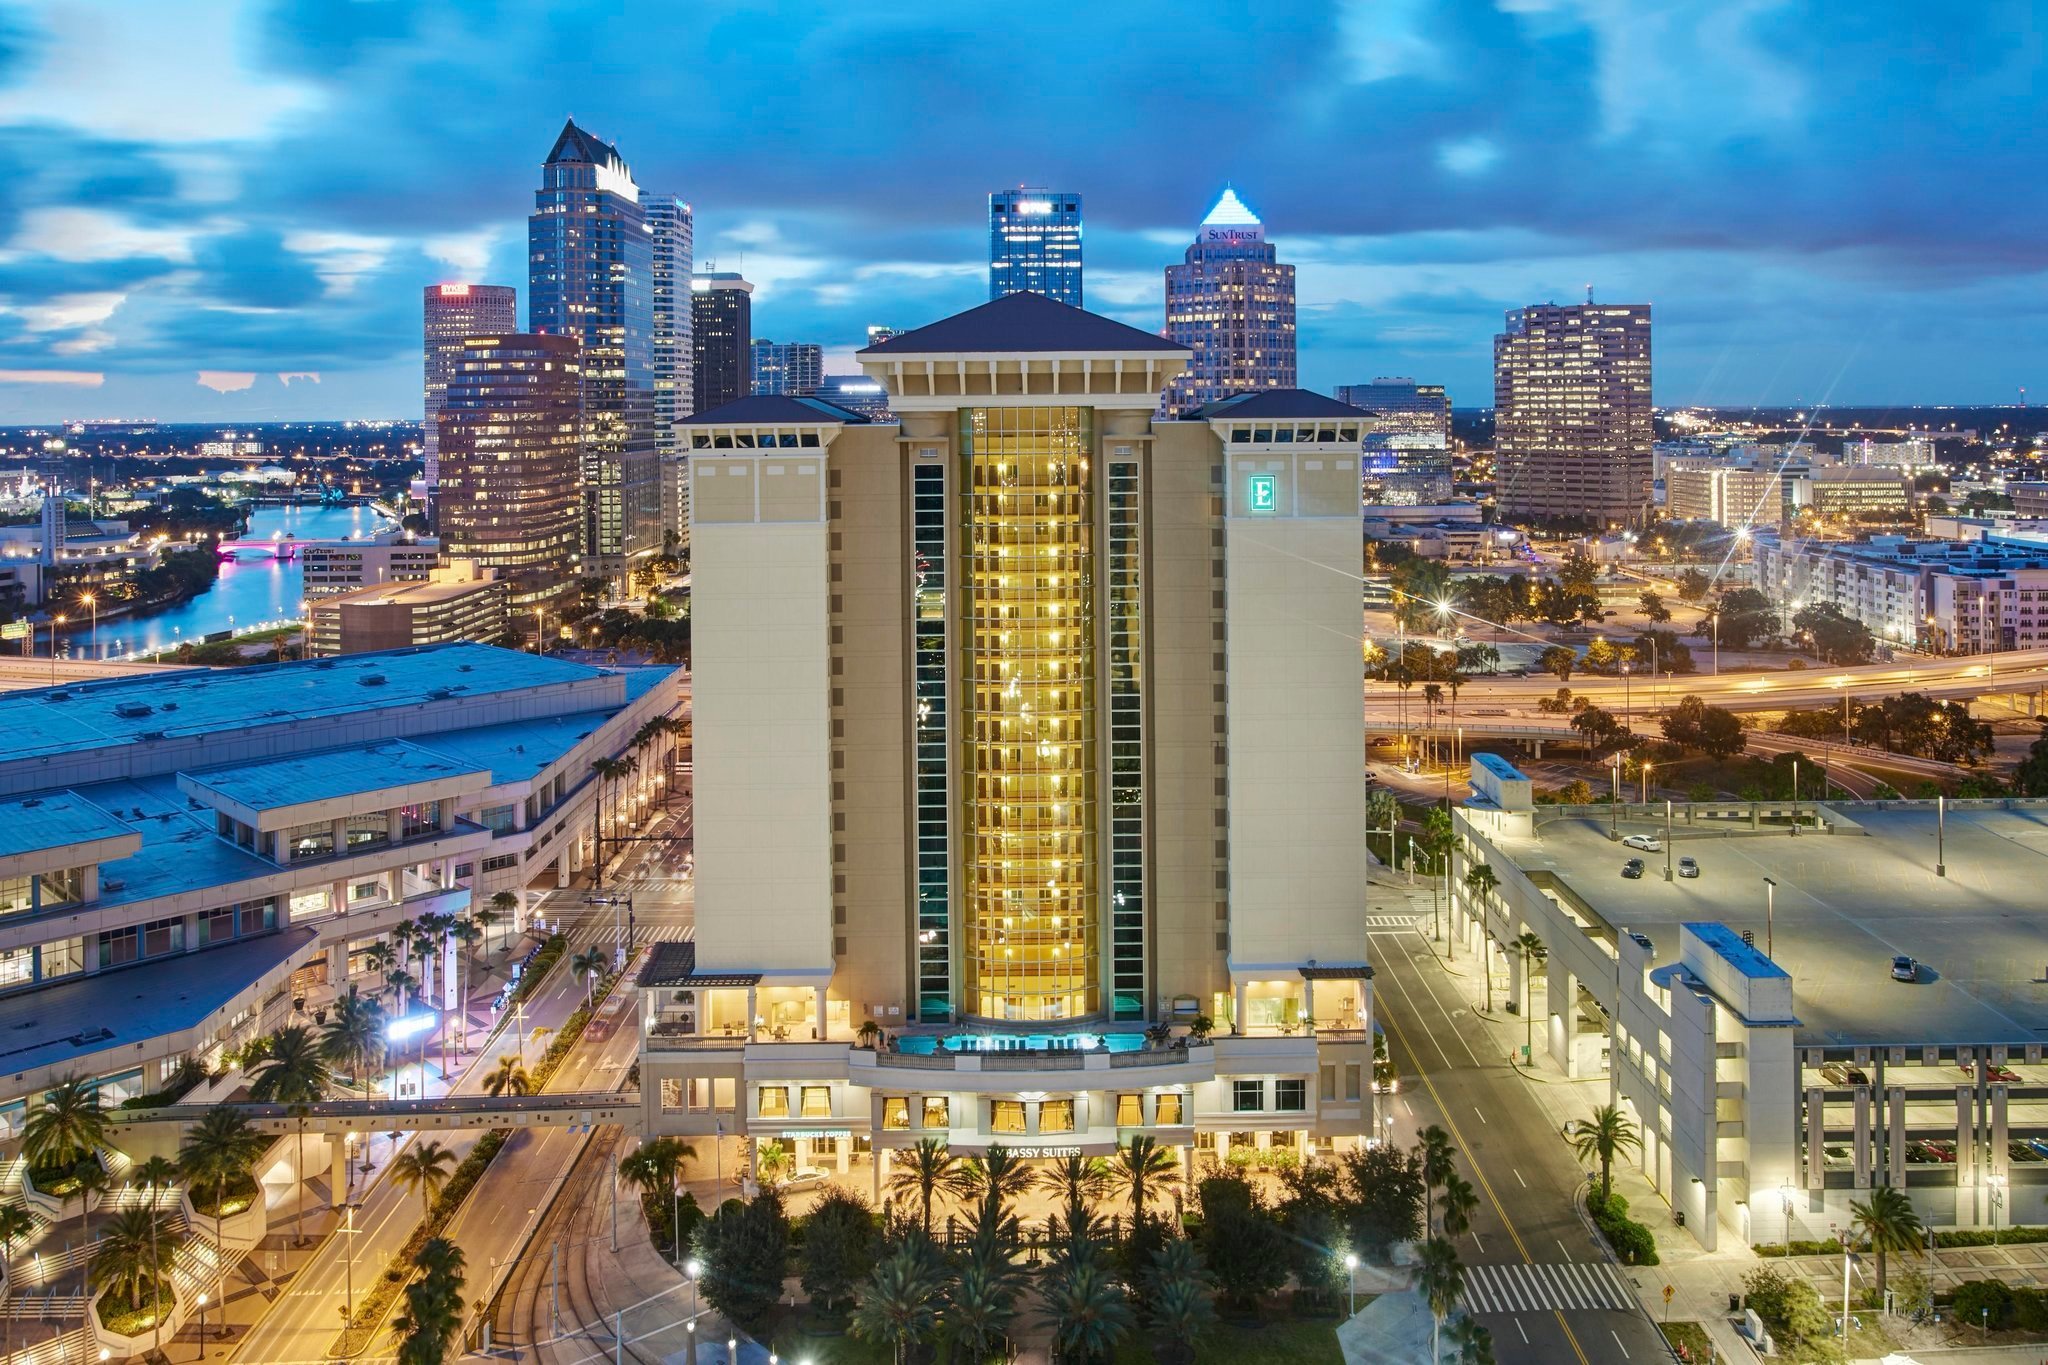 Photo of Embassy Suites by Hilton Tampa Downtown Convention Center, Tampa, FL